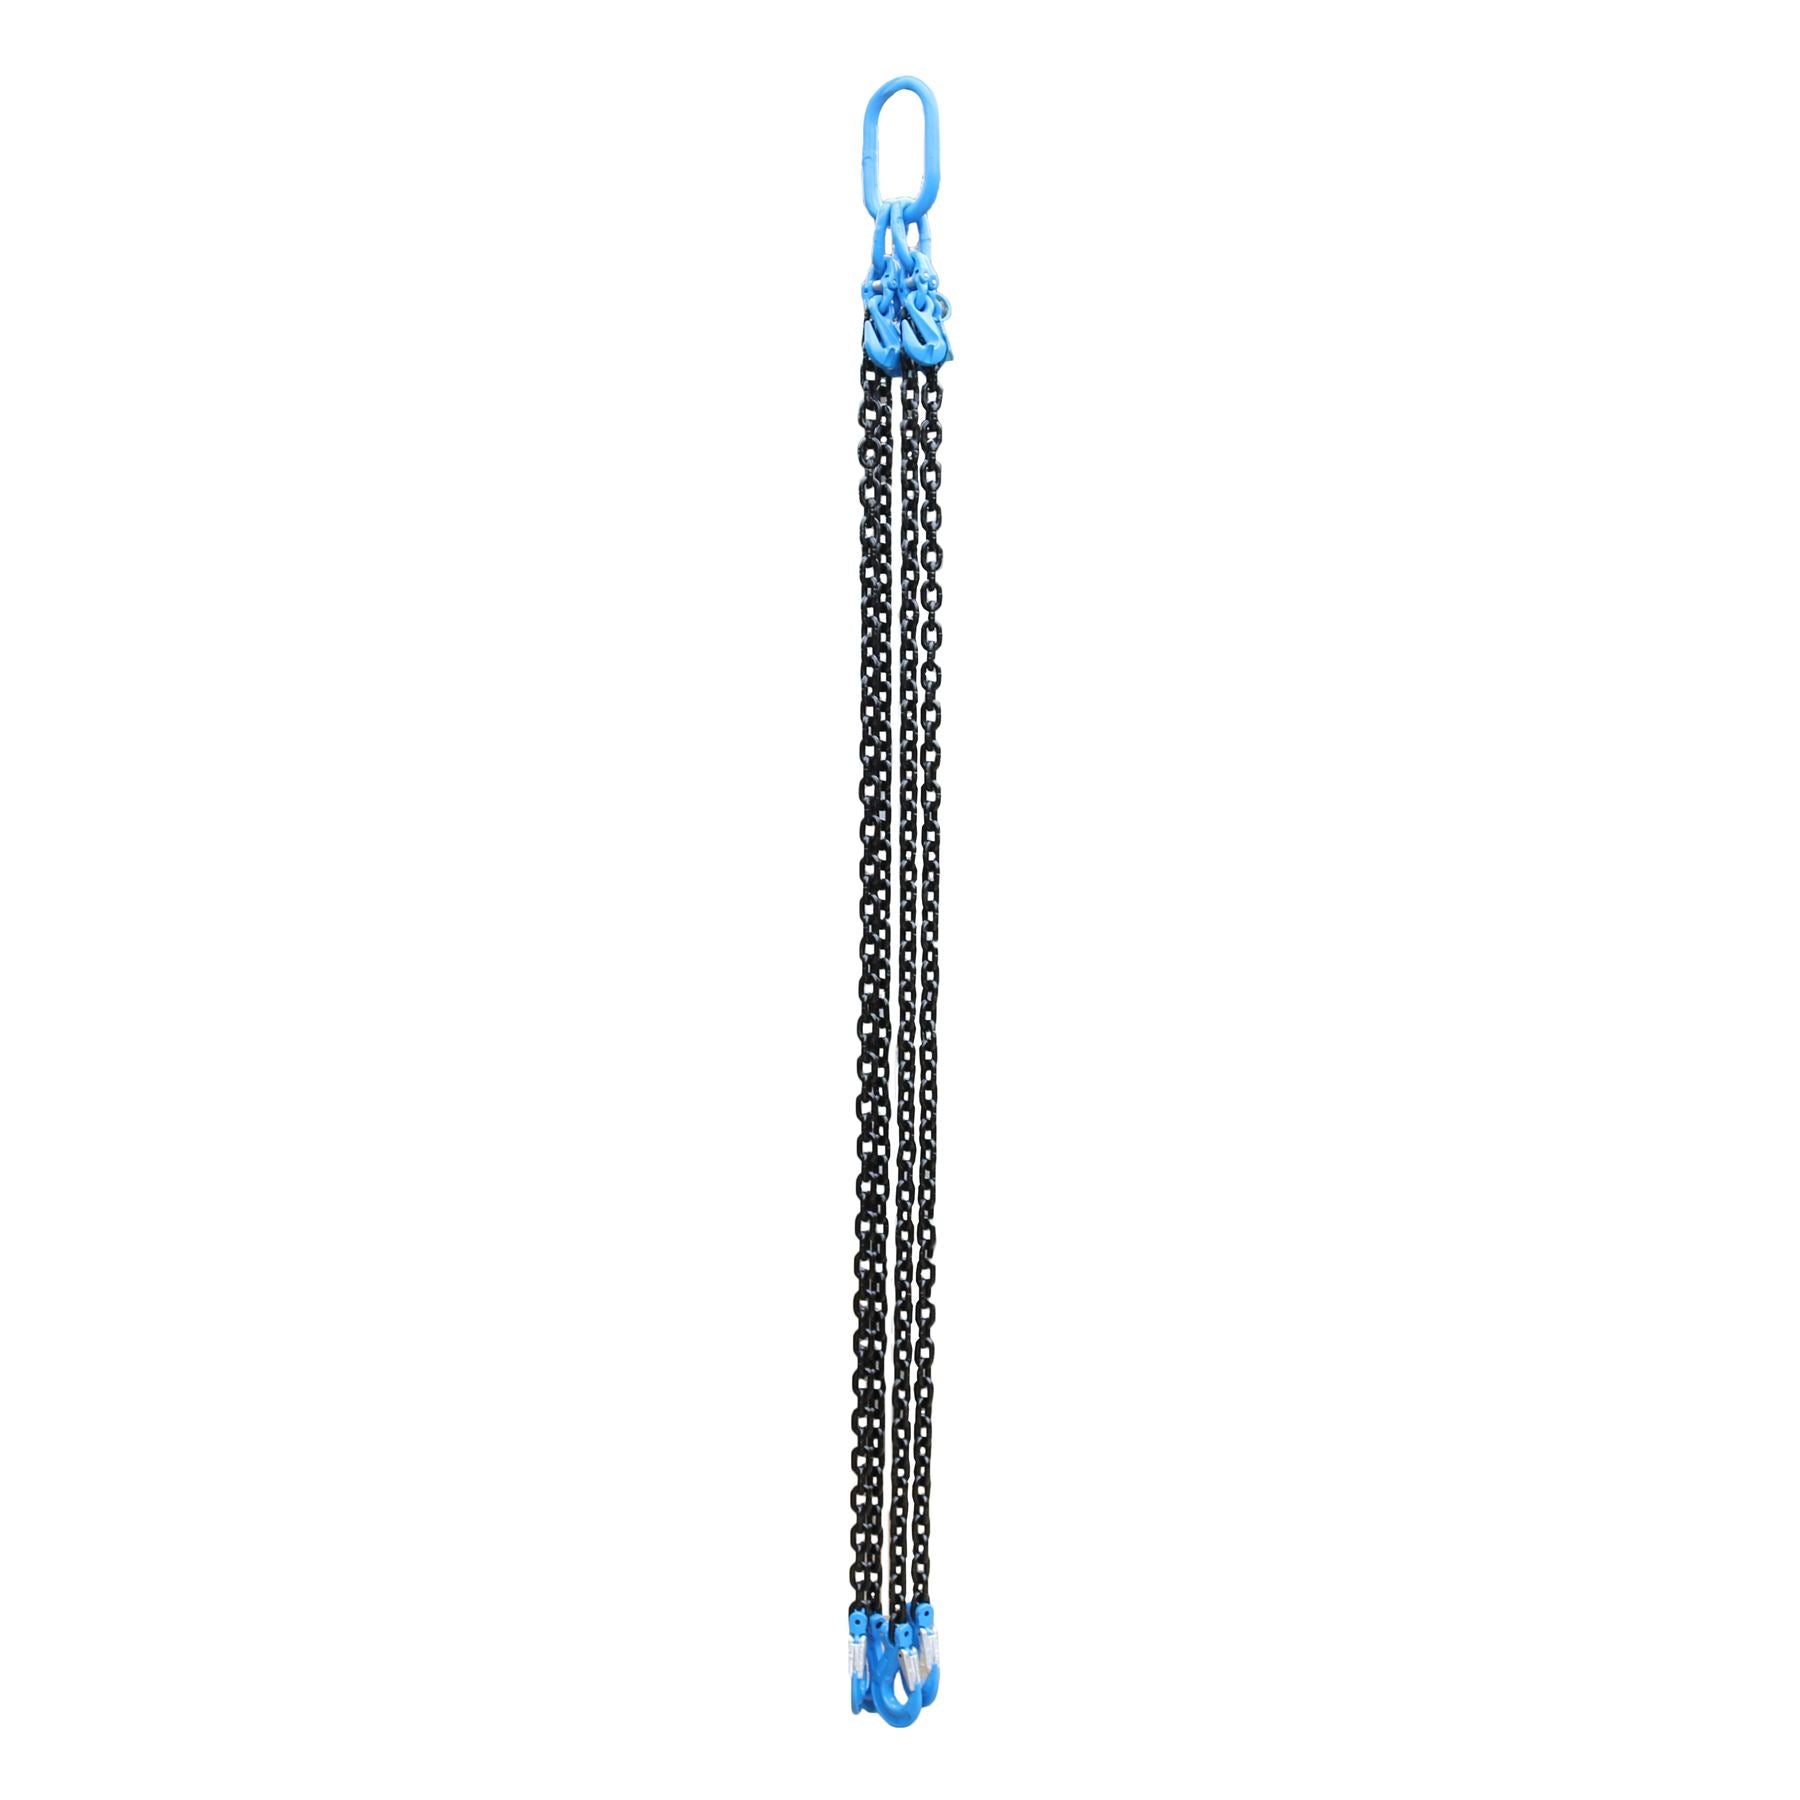 4 Leg Lifting Chain Sling with Clevis Grab Hook 2 Metre 10mm Chain WLL 6.7 Ton